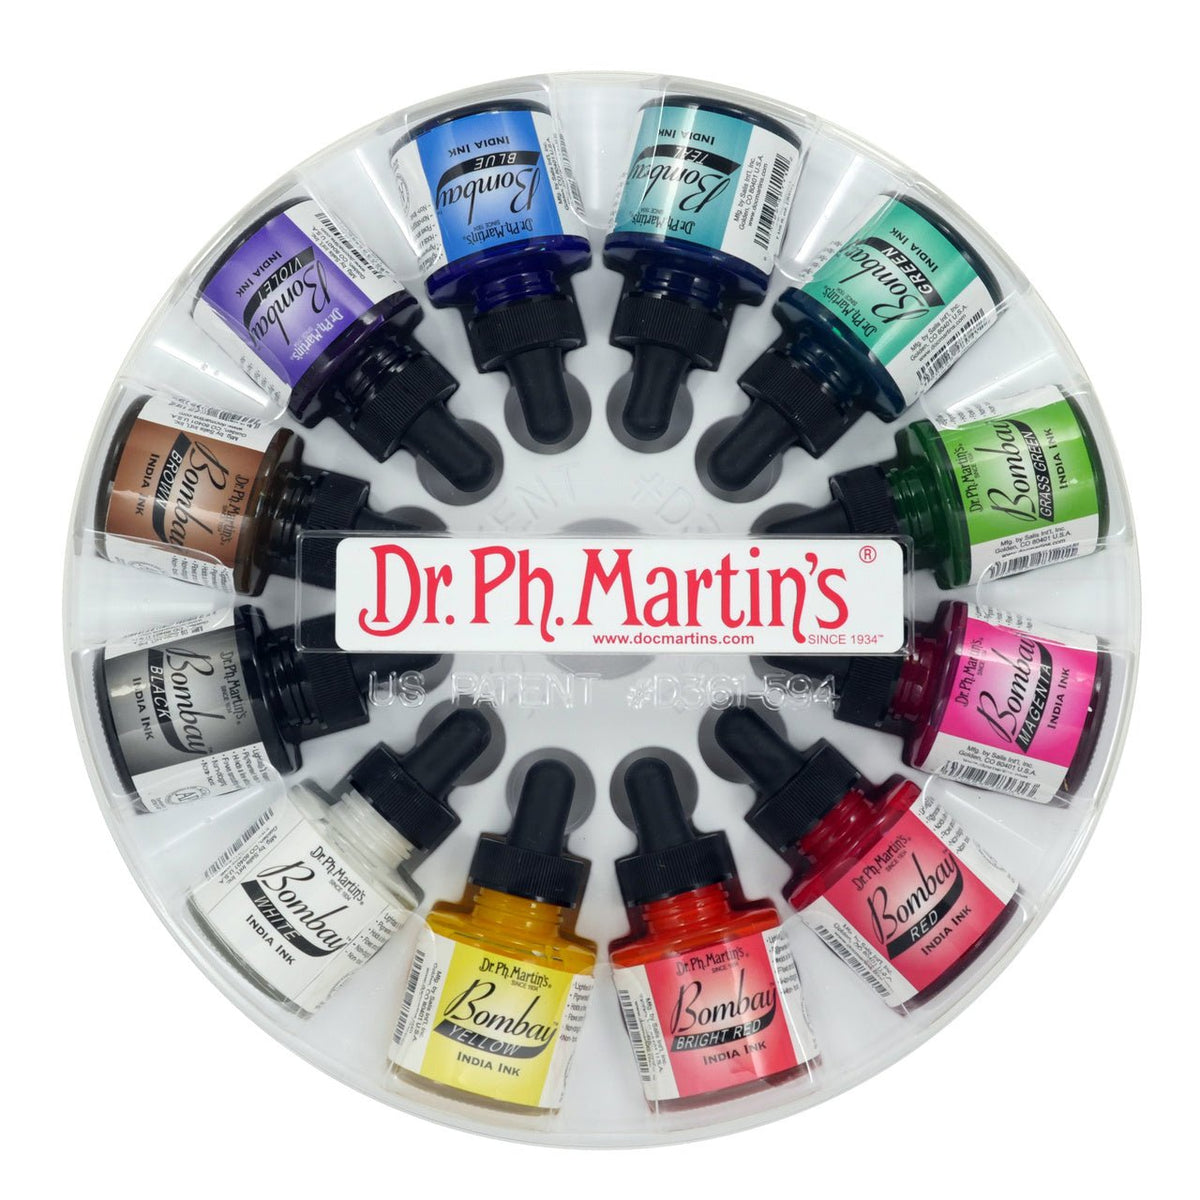 Dr. P.H. Martin Bombay India Ink - 1 ounce Set #1 - merriartist.com